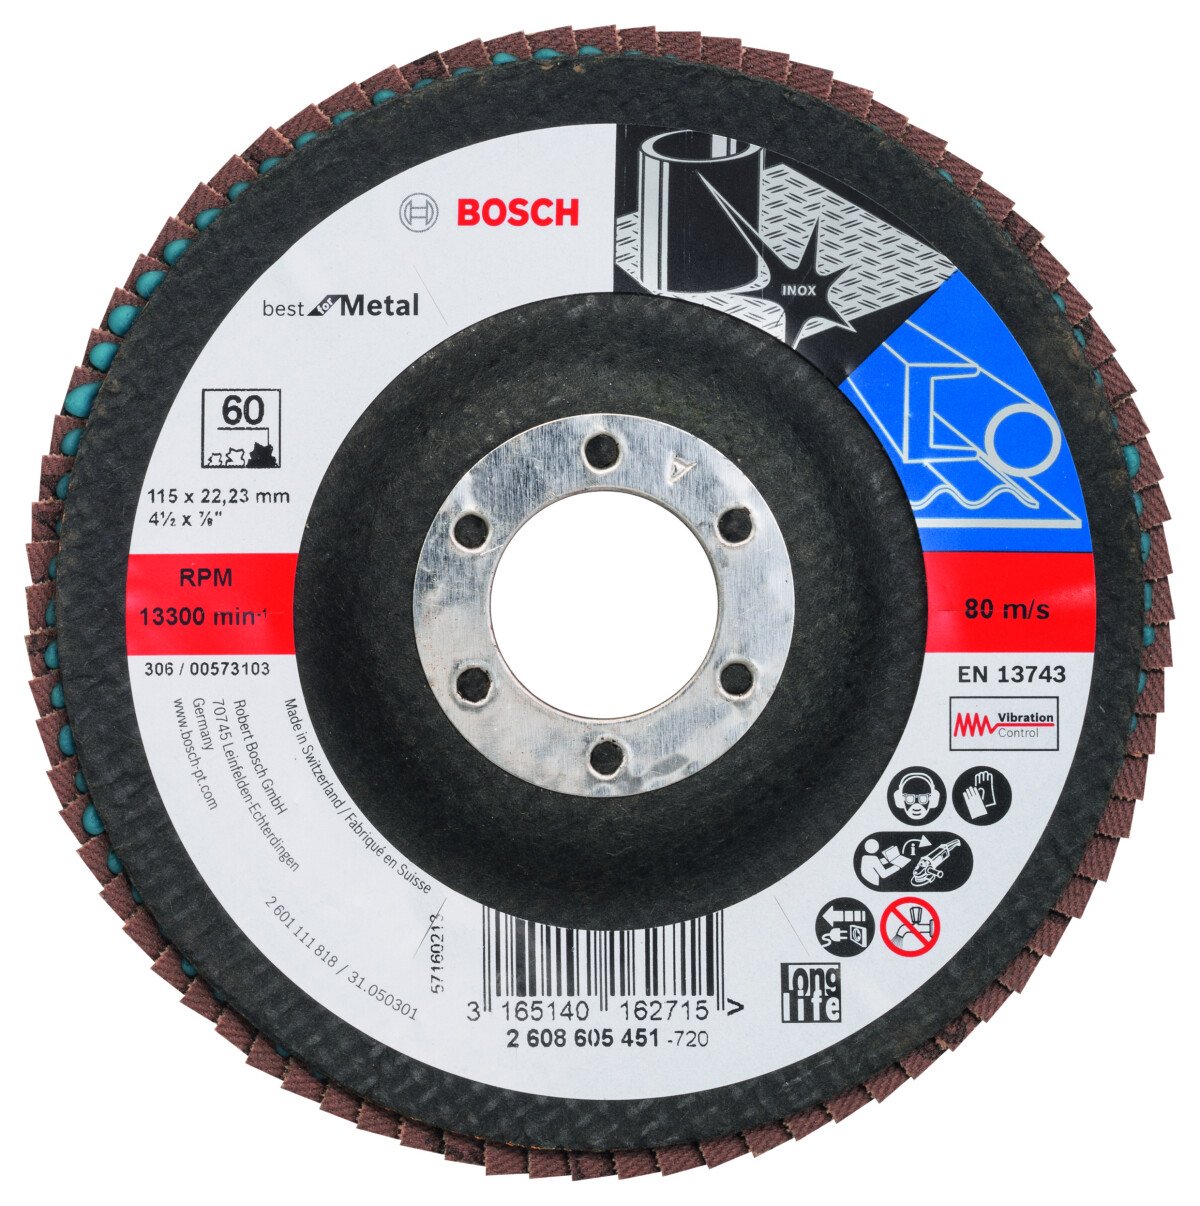 Bosch 2608605451 Flap Sanding discs for Angle Grinders . 115x22 G60